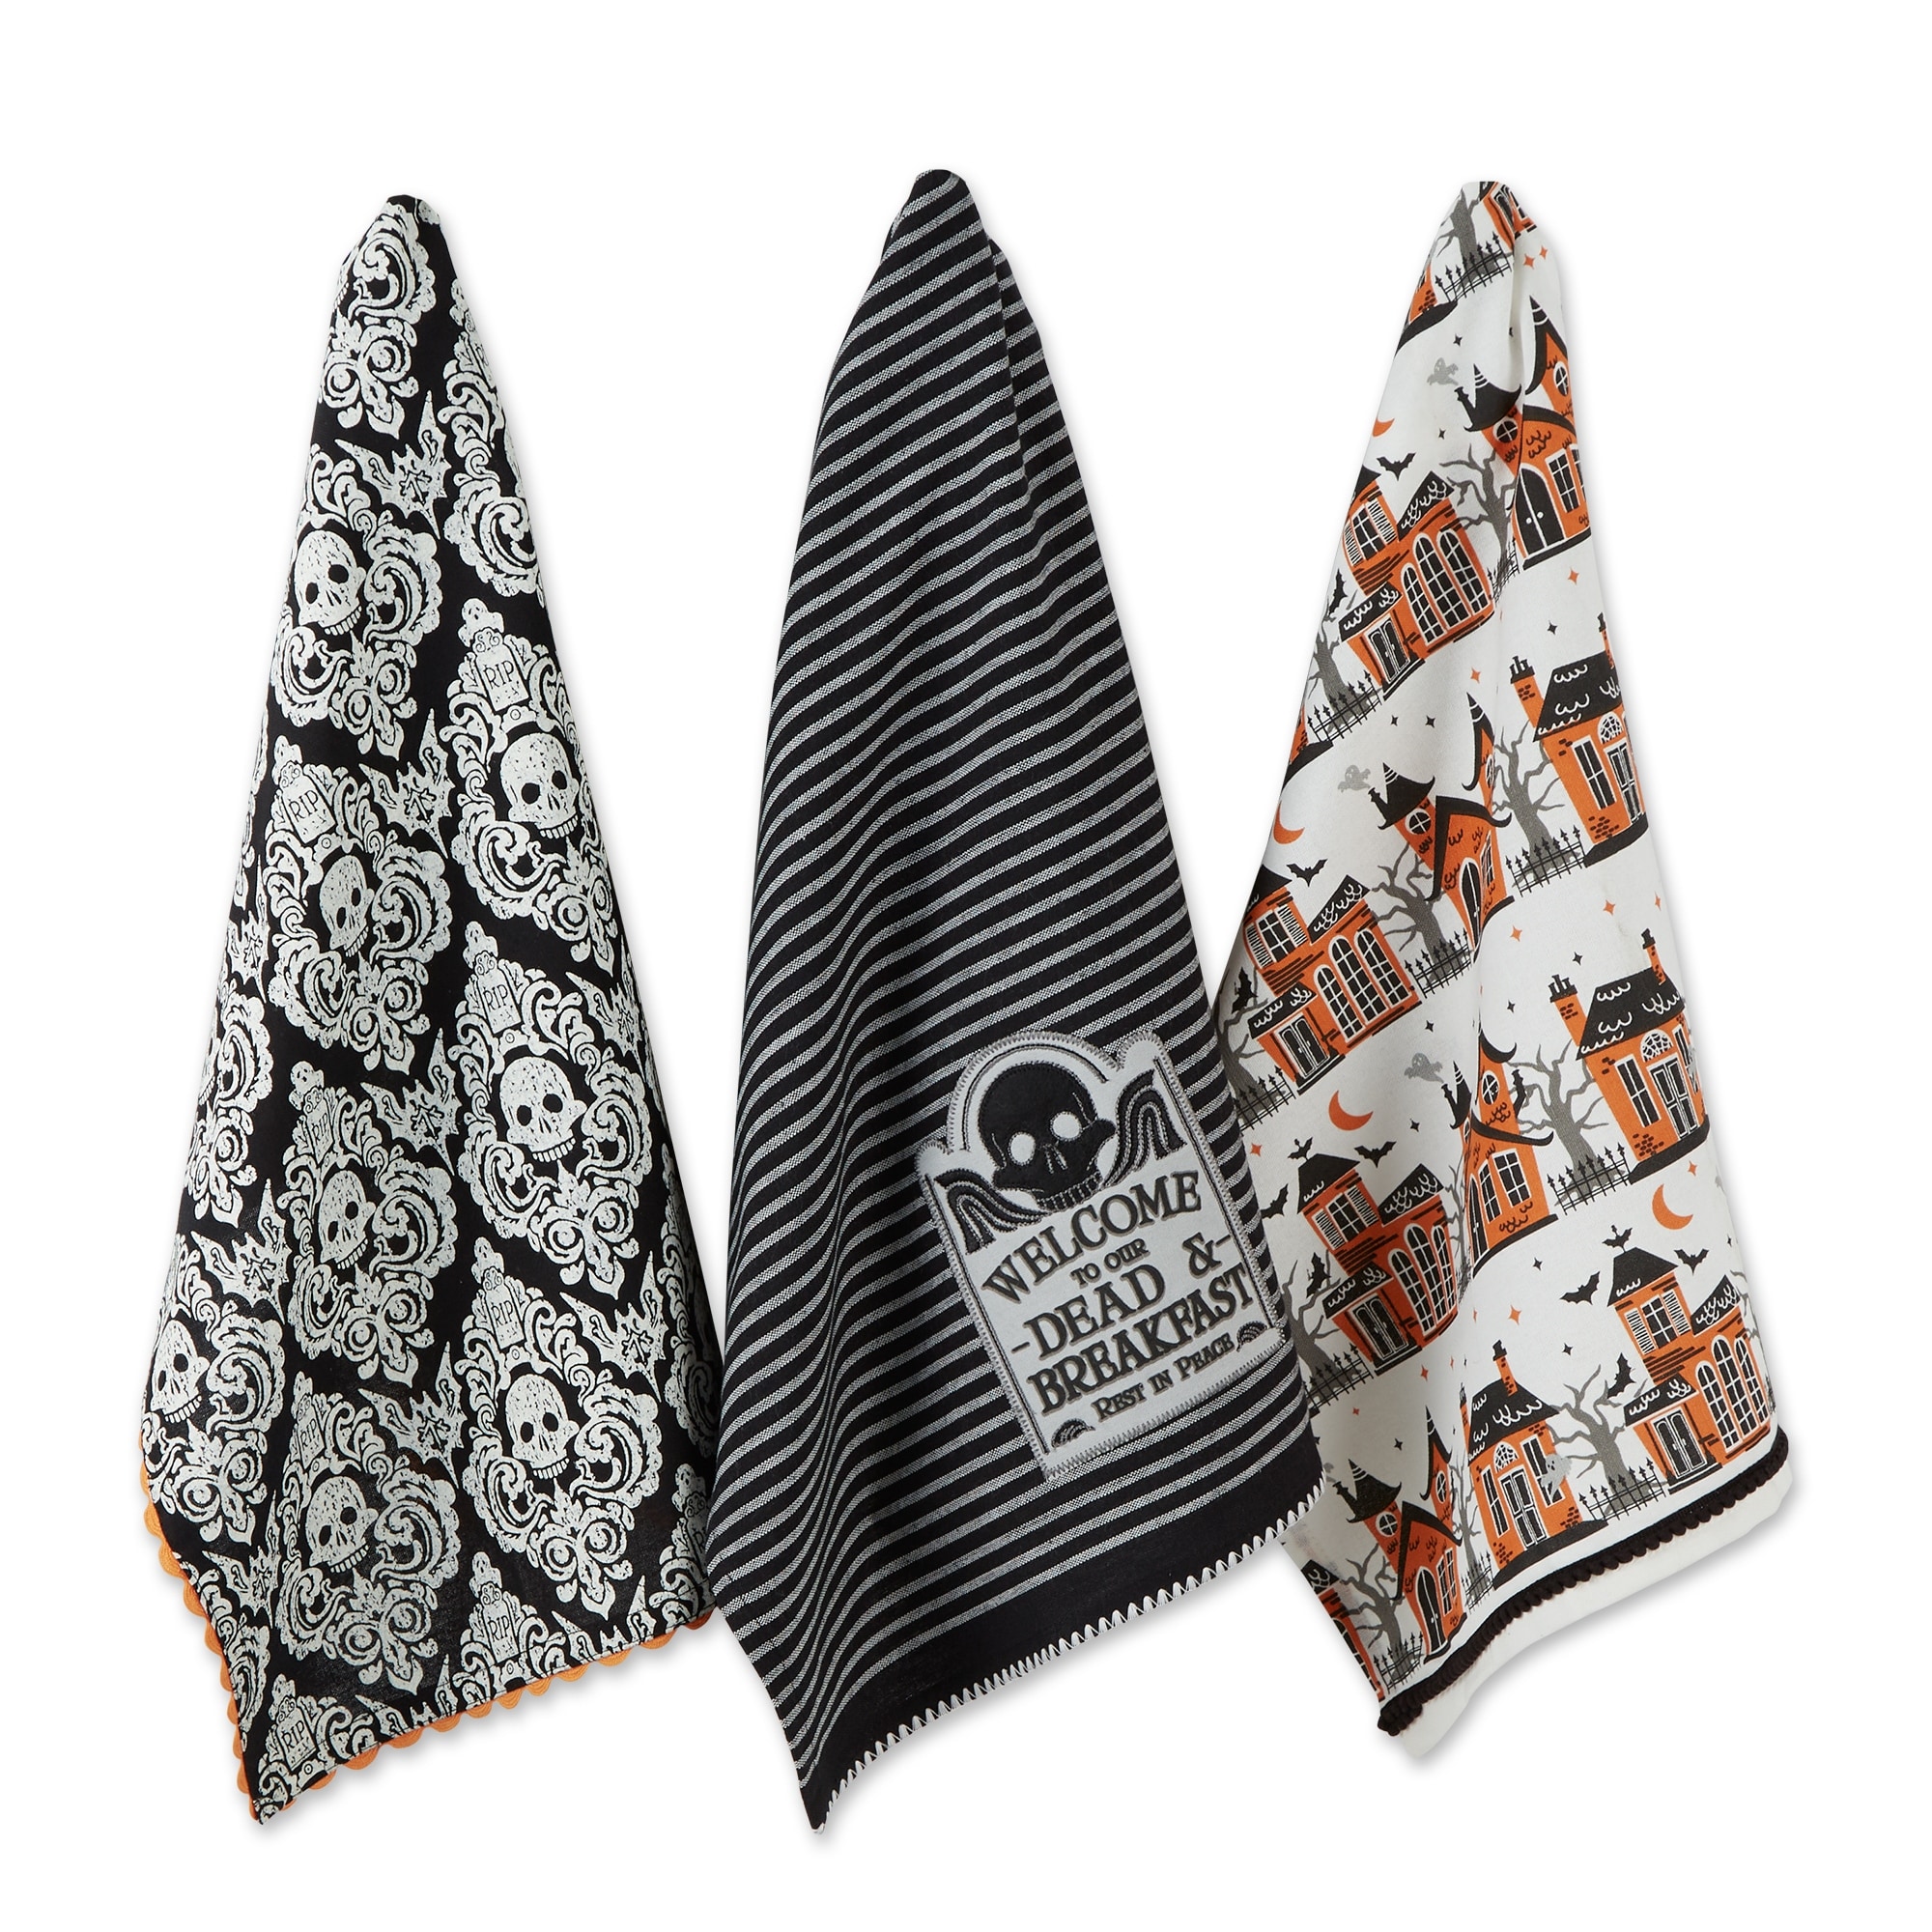 https://ak1.ostkcdn.com/images/products/is/images/direct/070b5e90211208d522efcdc7bf9d332027eb8a05/DII-Halloween-Embellished-Dishtowels-Set-of-3.jpg